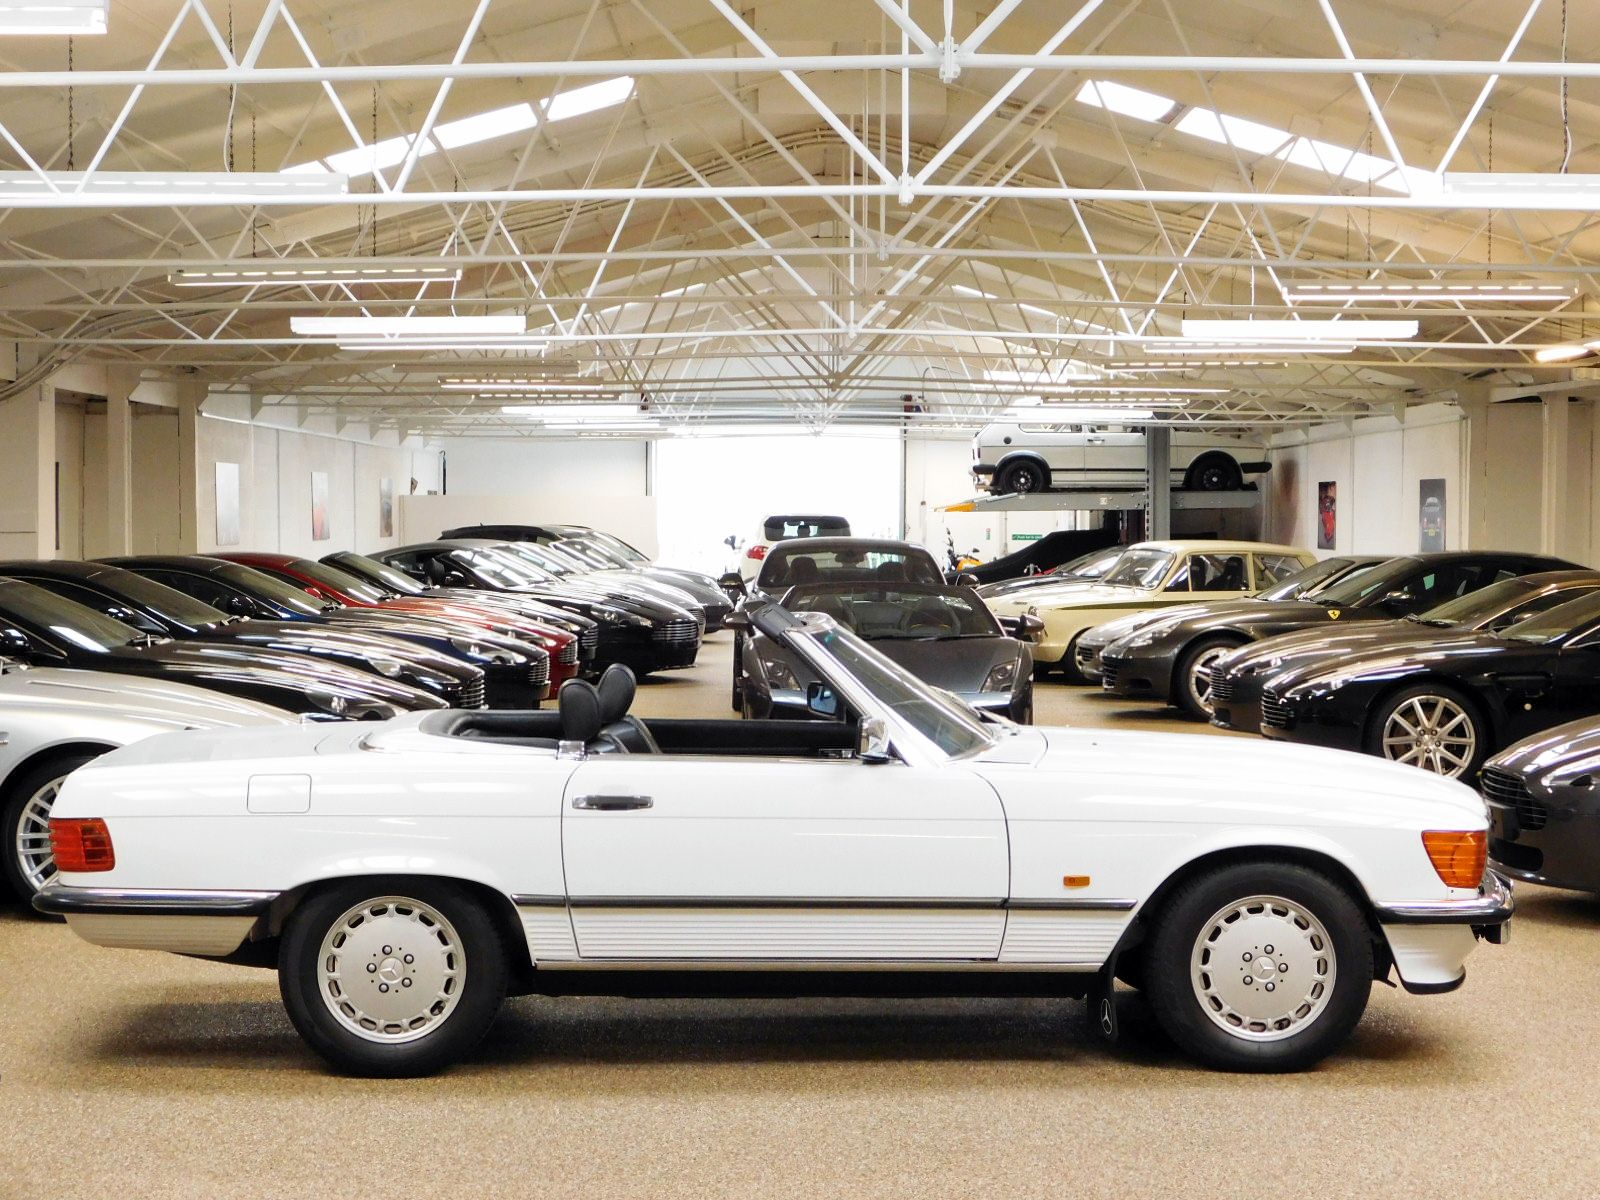 McGurk Performance Cars are pleased to offer this 300 SL. One Lady Owner From 1st August 1988 to 2016. Original Data Card And PDI Paperwork From 27-07-88. 18 Mercedes Benz Main Dealer Service Stamps Original Service Book. Last Serviced Mercedes Benz Stratford Upon Avon 2020. Every MOT From 3 Years Old to Date Documented As Follows: July 1991 16570 Miles. July 1992 20691 Miles. March 1993 21473 Miles. March 1994 24052 Miles. April 1995 25175 Miles. May 1996 26183 Miles. April 1997 27754 Miles. April 1998 28150 Miles. March 1999 28992 Miles. April 2000 29573 Miles. May 2001 30062 Miles. April 2002 30374 Miles. March 2003 30739 Miles. July 2004 31614 Miles. August 2005 32099 Miles. July 2006 32494 Miles. July 2007 32729 Miles. July 2008 32891 Miles. July 2009 33040 Miles. July 2010 33104 Miles. July 2011 33248 Miles. July 2012 33361 Miles. July 2013 33488 Miles. July 2014 33523 Miles. August 2015 33558 Miles. August 2016 34343 Miles. August 2017 34502 Miles August 2018 34560 Miles Only 2 Mot Advisories To Date As Follows: Slightly Blocked Washer Jets. Slight Exhaust Blow, Renewed By Mercedes Benz. Original Tool Kit And Hand Books Including Leather Wallet. X4 Michelin Factory Tyres. Full Black leather Interior. Rear Seating. Original Fire Extinguisher. Spare Wheel & Tyre Unused. Original Number Plates From 1988 Macclesfield Mercedes Benz. Electric Windows. Front Fog Lights. Original Black Mohair Soft Top. White Factory Fitted Hard Top. Immaculate Unmarked Condition Throughout. Very Rare To Source In This Immaculate Unrestored Condition. Original Factory Paintwork And Wax Oil. A Perfect Example For Increasing Investment Potential Or Show Vehicle.